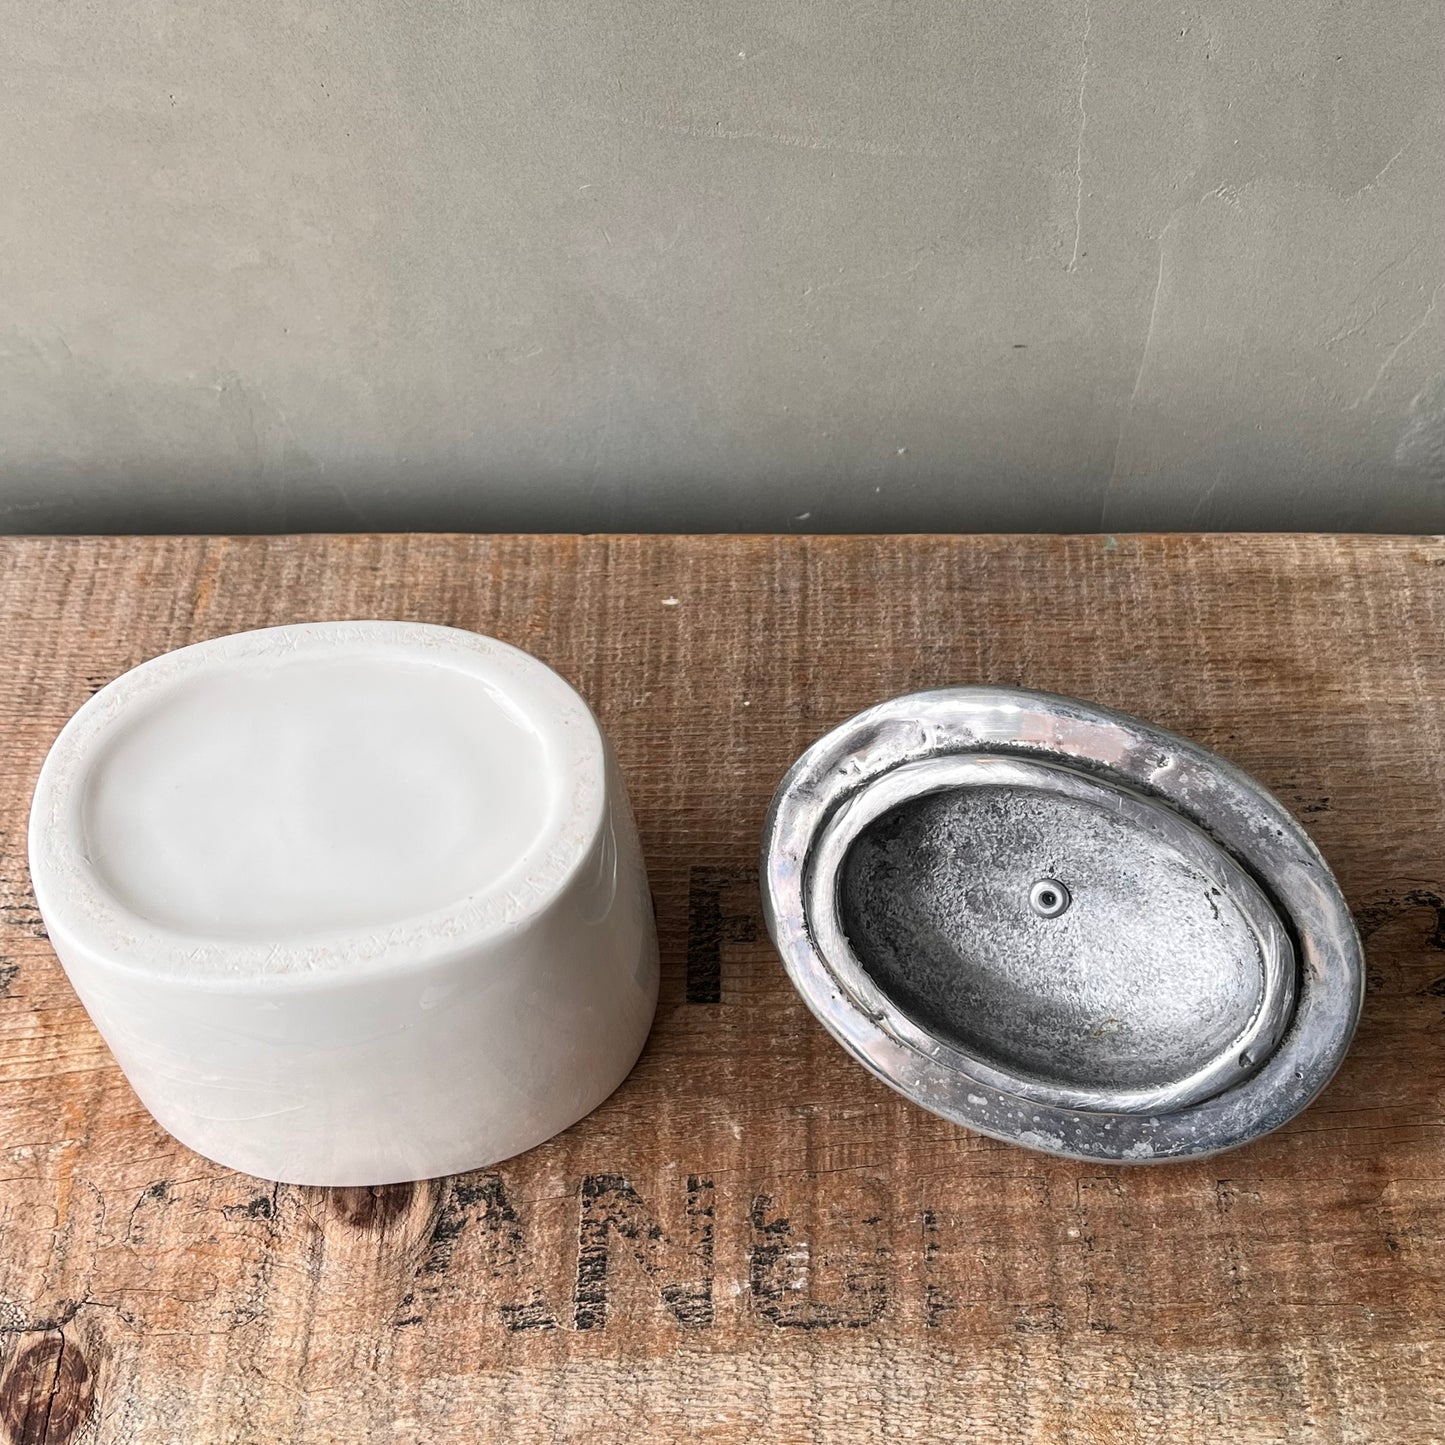 【USA vintage】Canister with casting lid